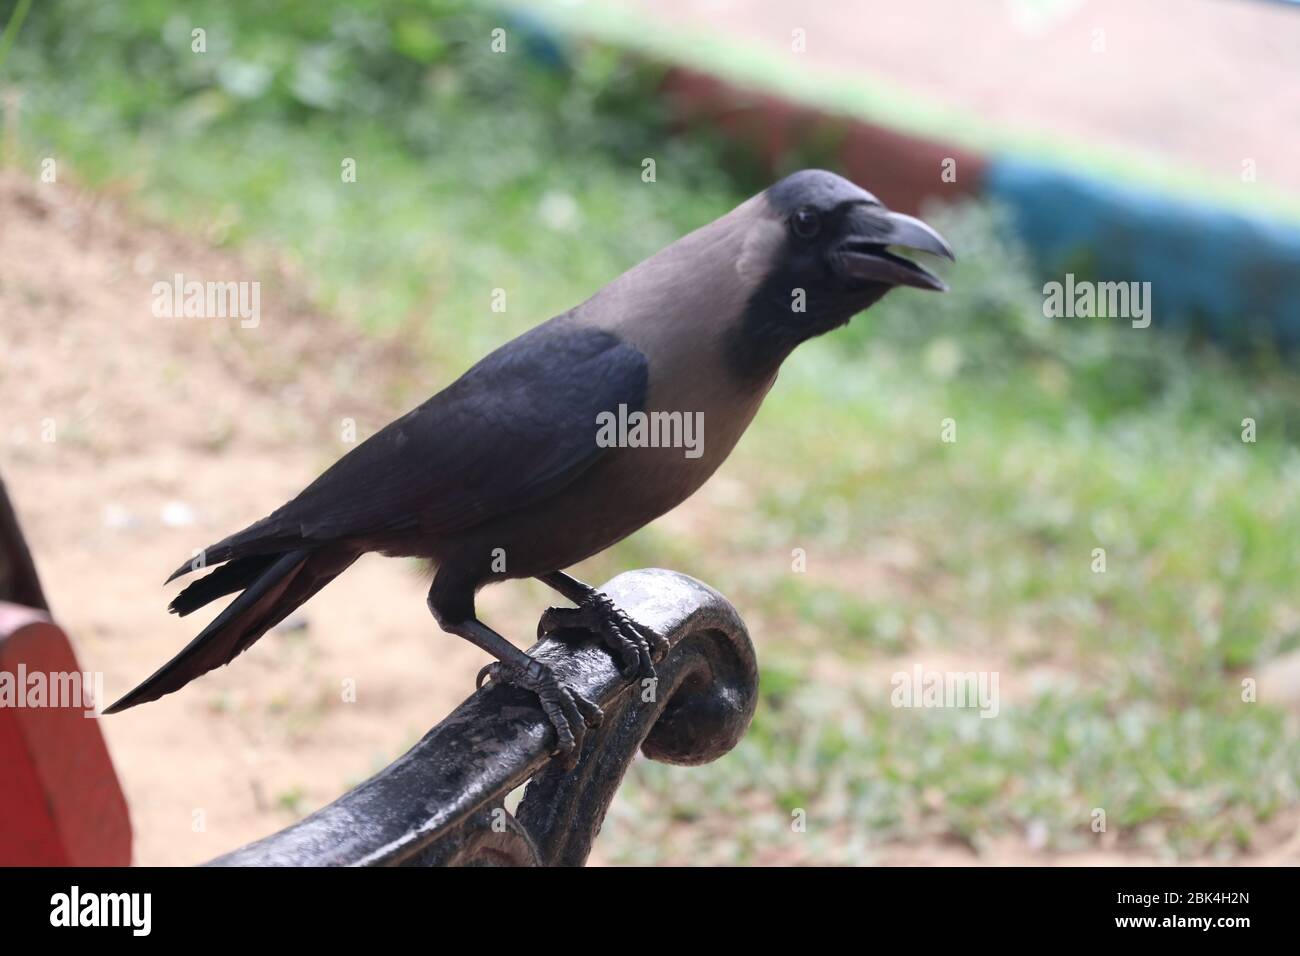 A black crow sitting at the handle of a prak banch, outdoor photography Stock Photo